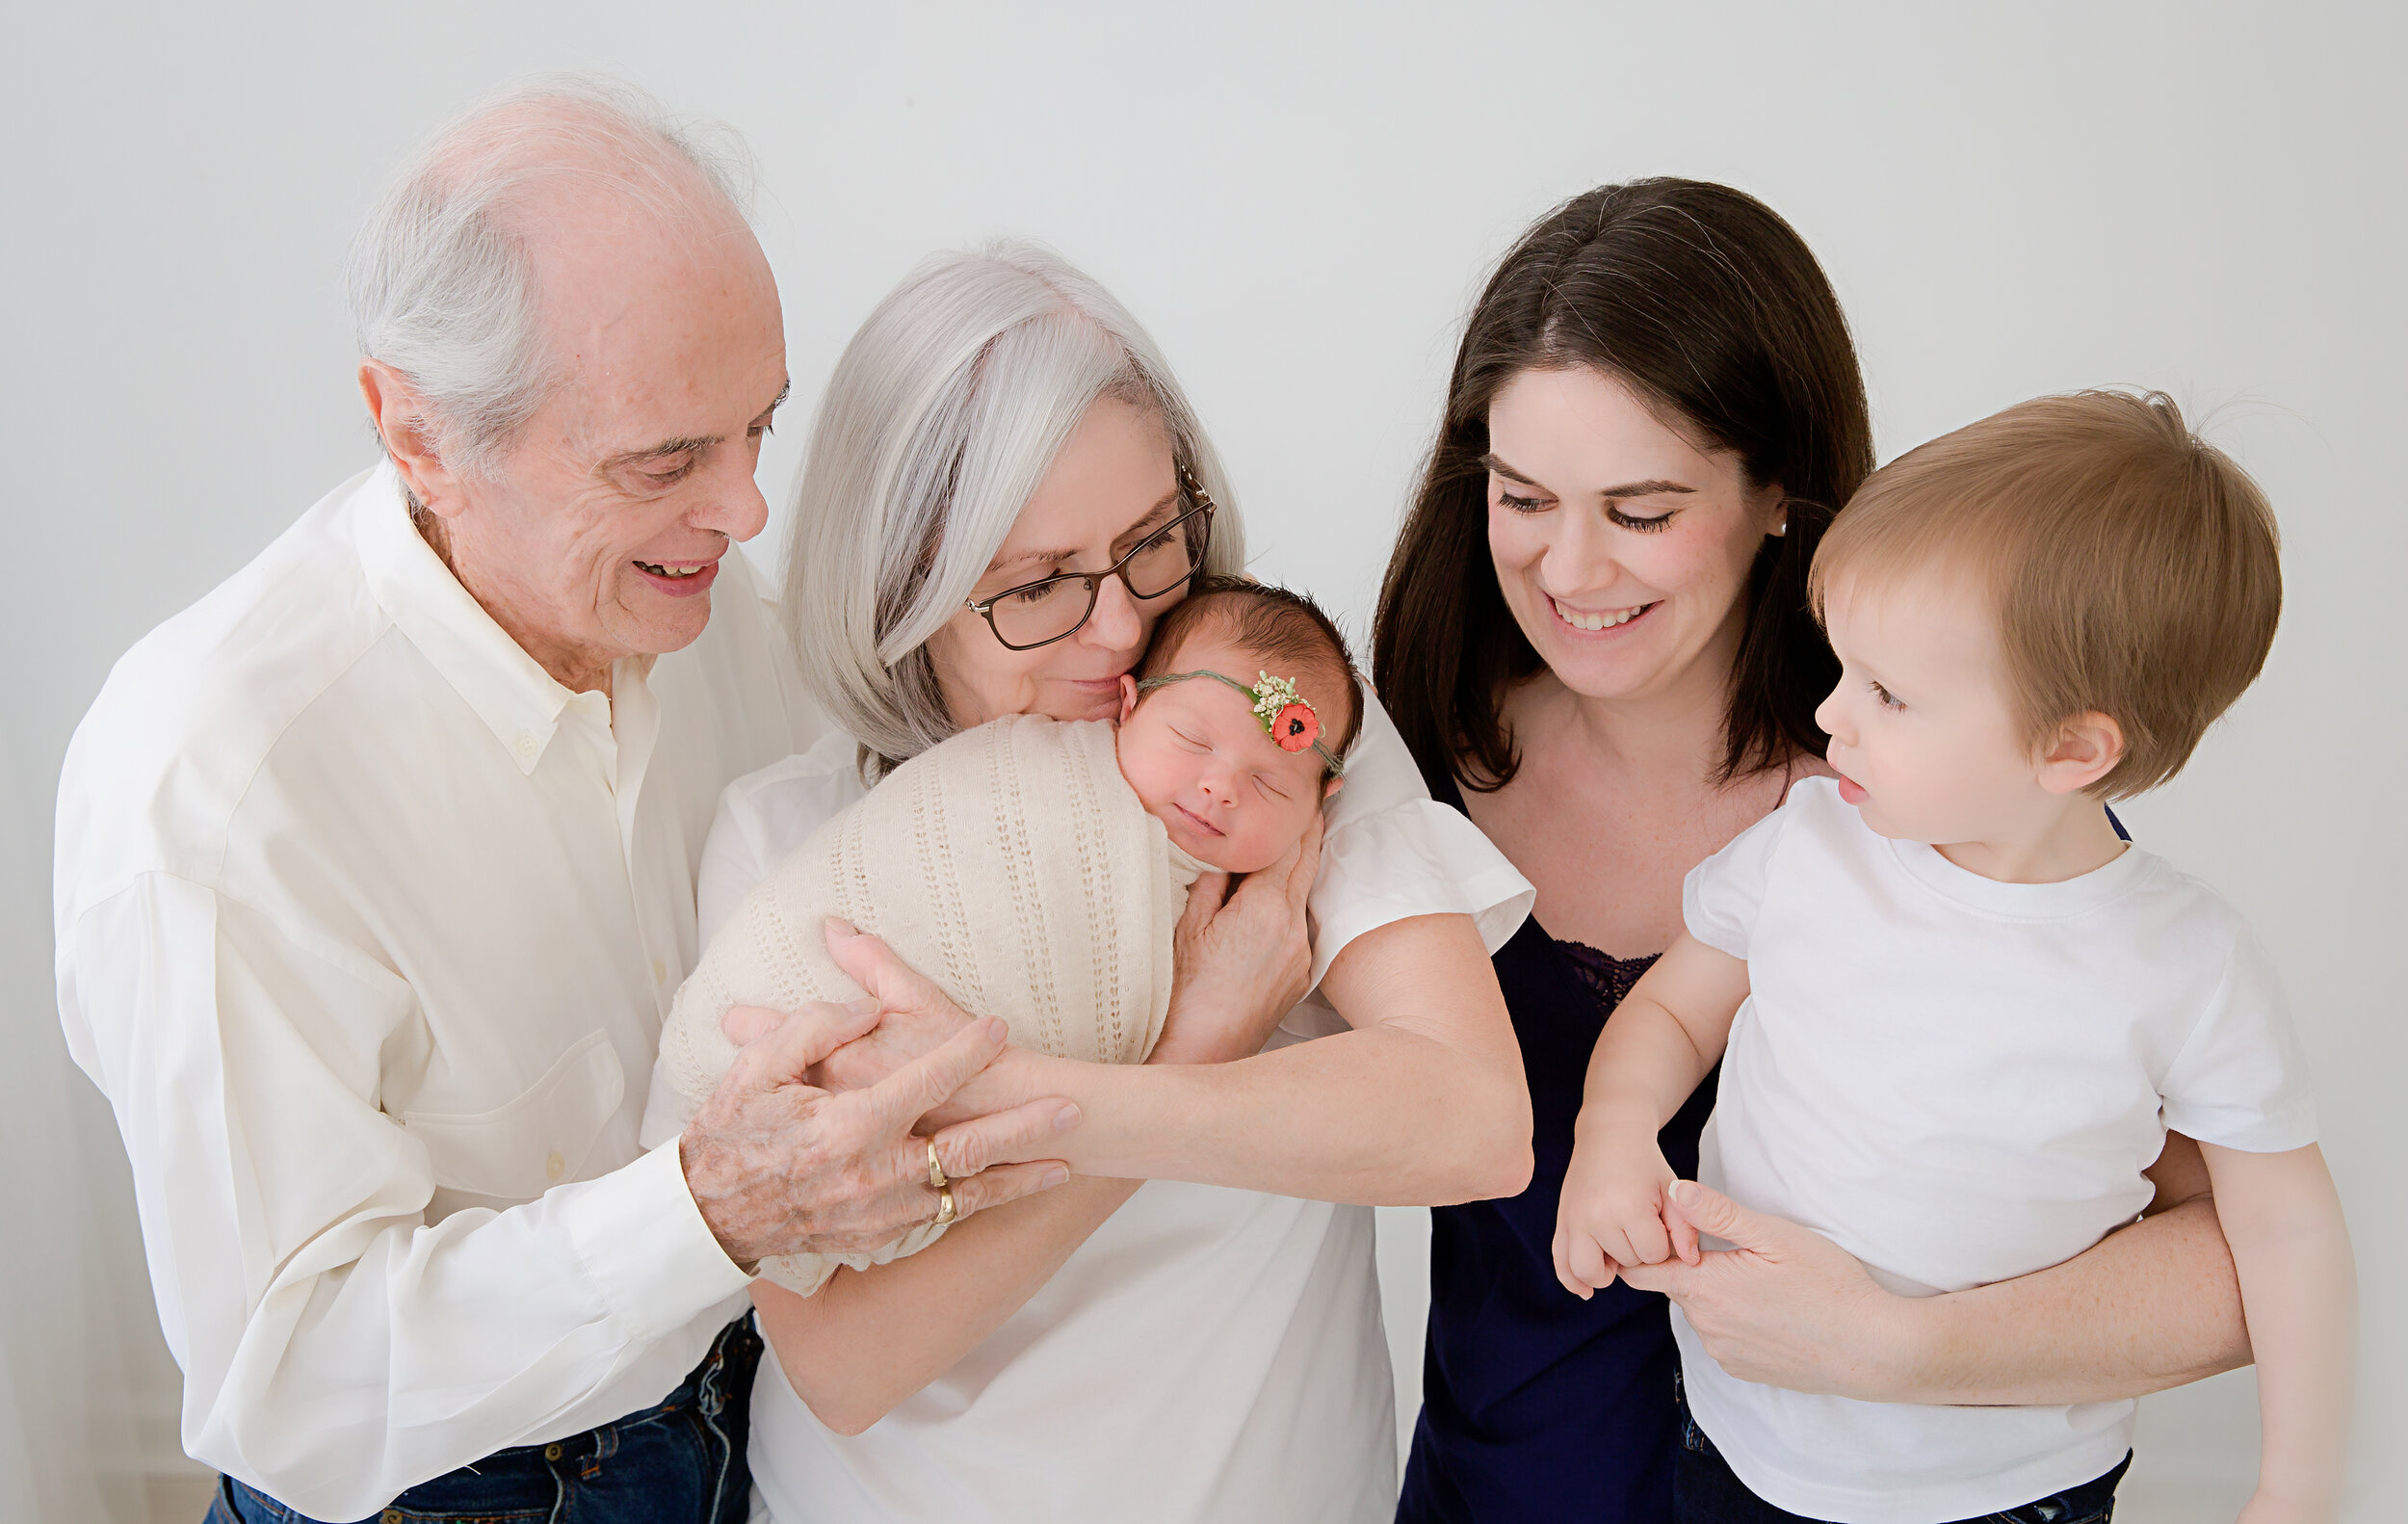 grandparents-holding-baby-standing-next-to-mom-and-big-brother